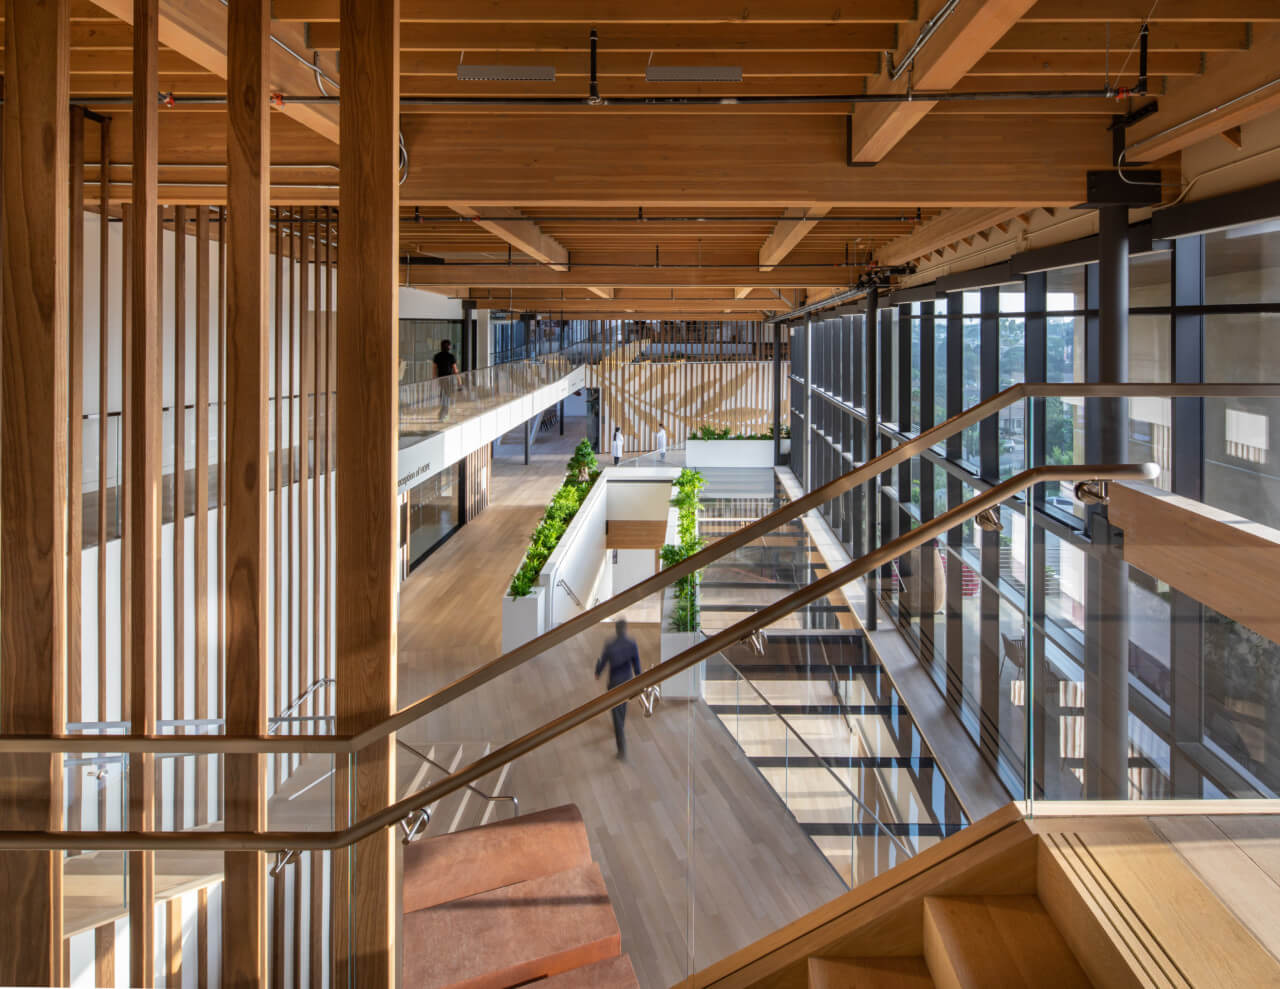 wood interior of a double-height research building